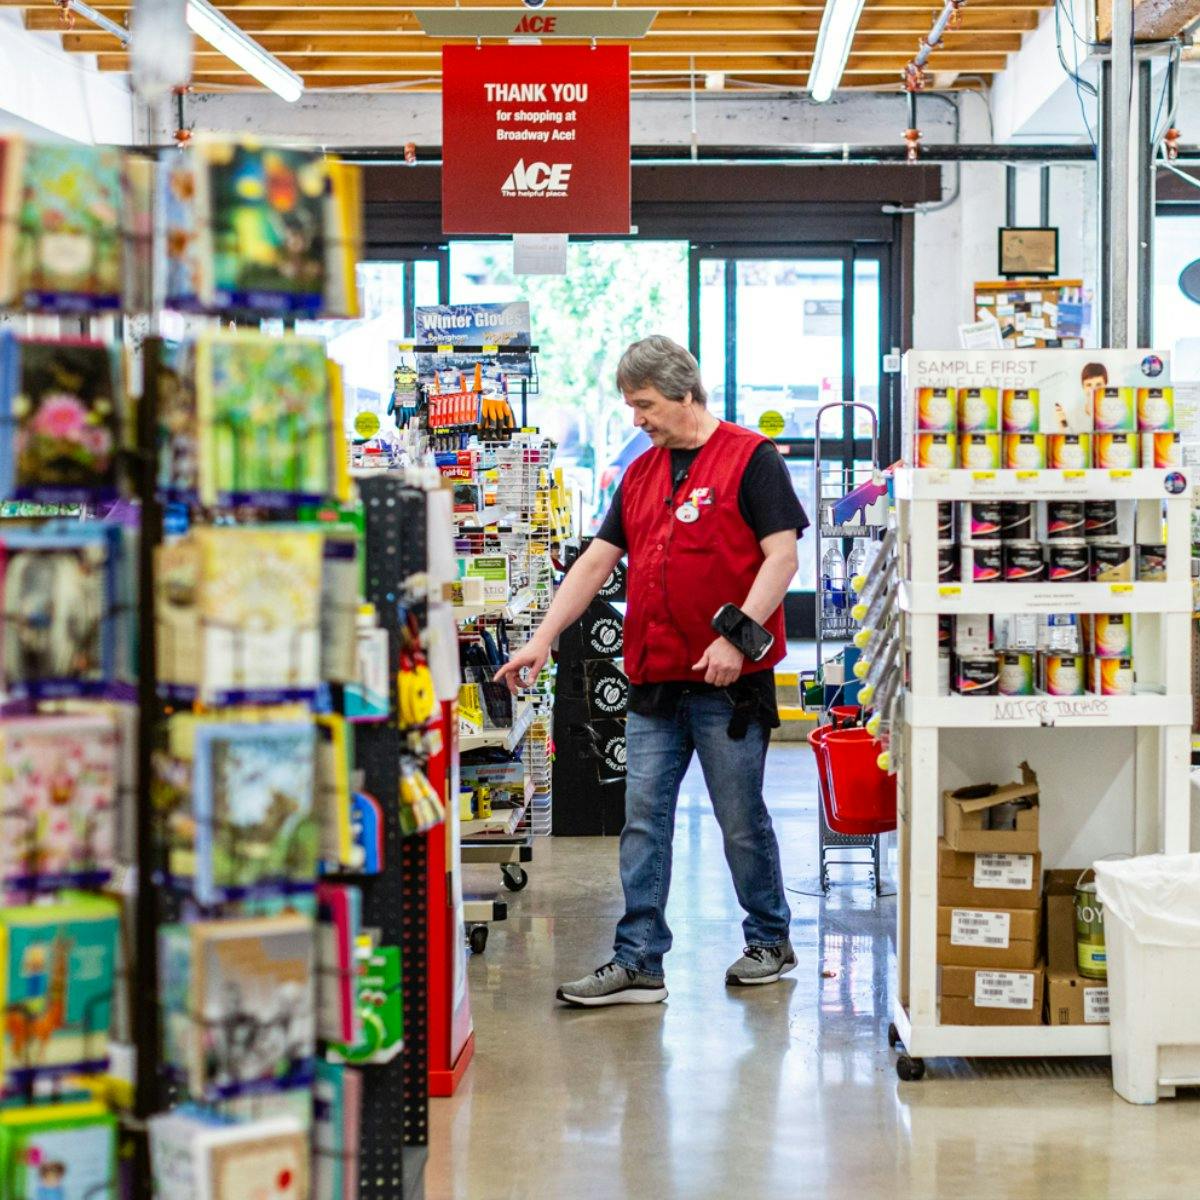 An Inside Look at the Ace Hardware Return Policy